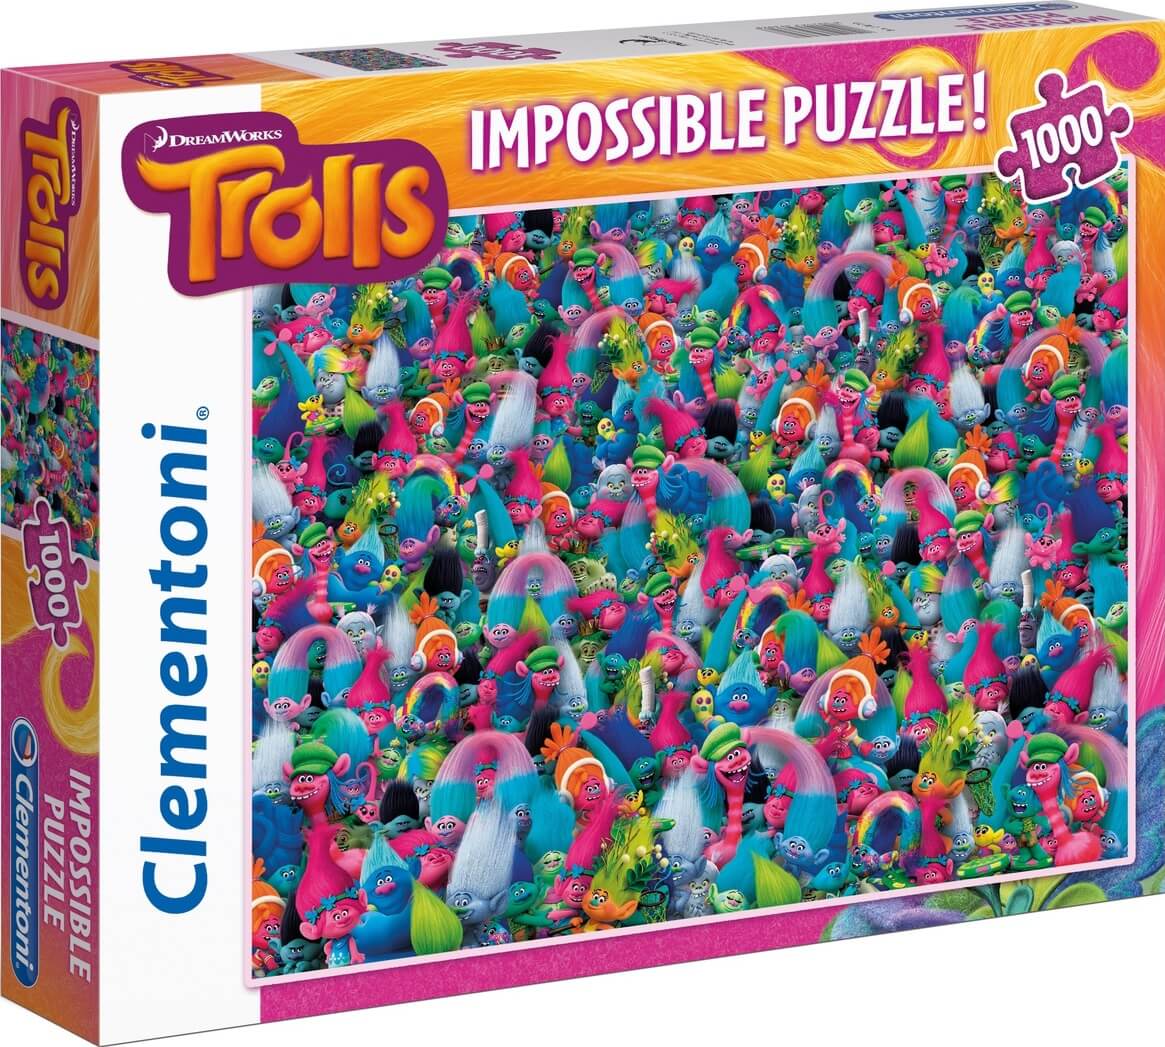 1000 Imposible Puzzle Trolls